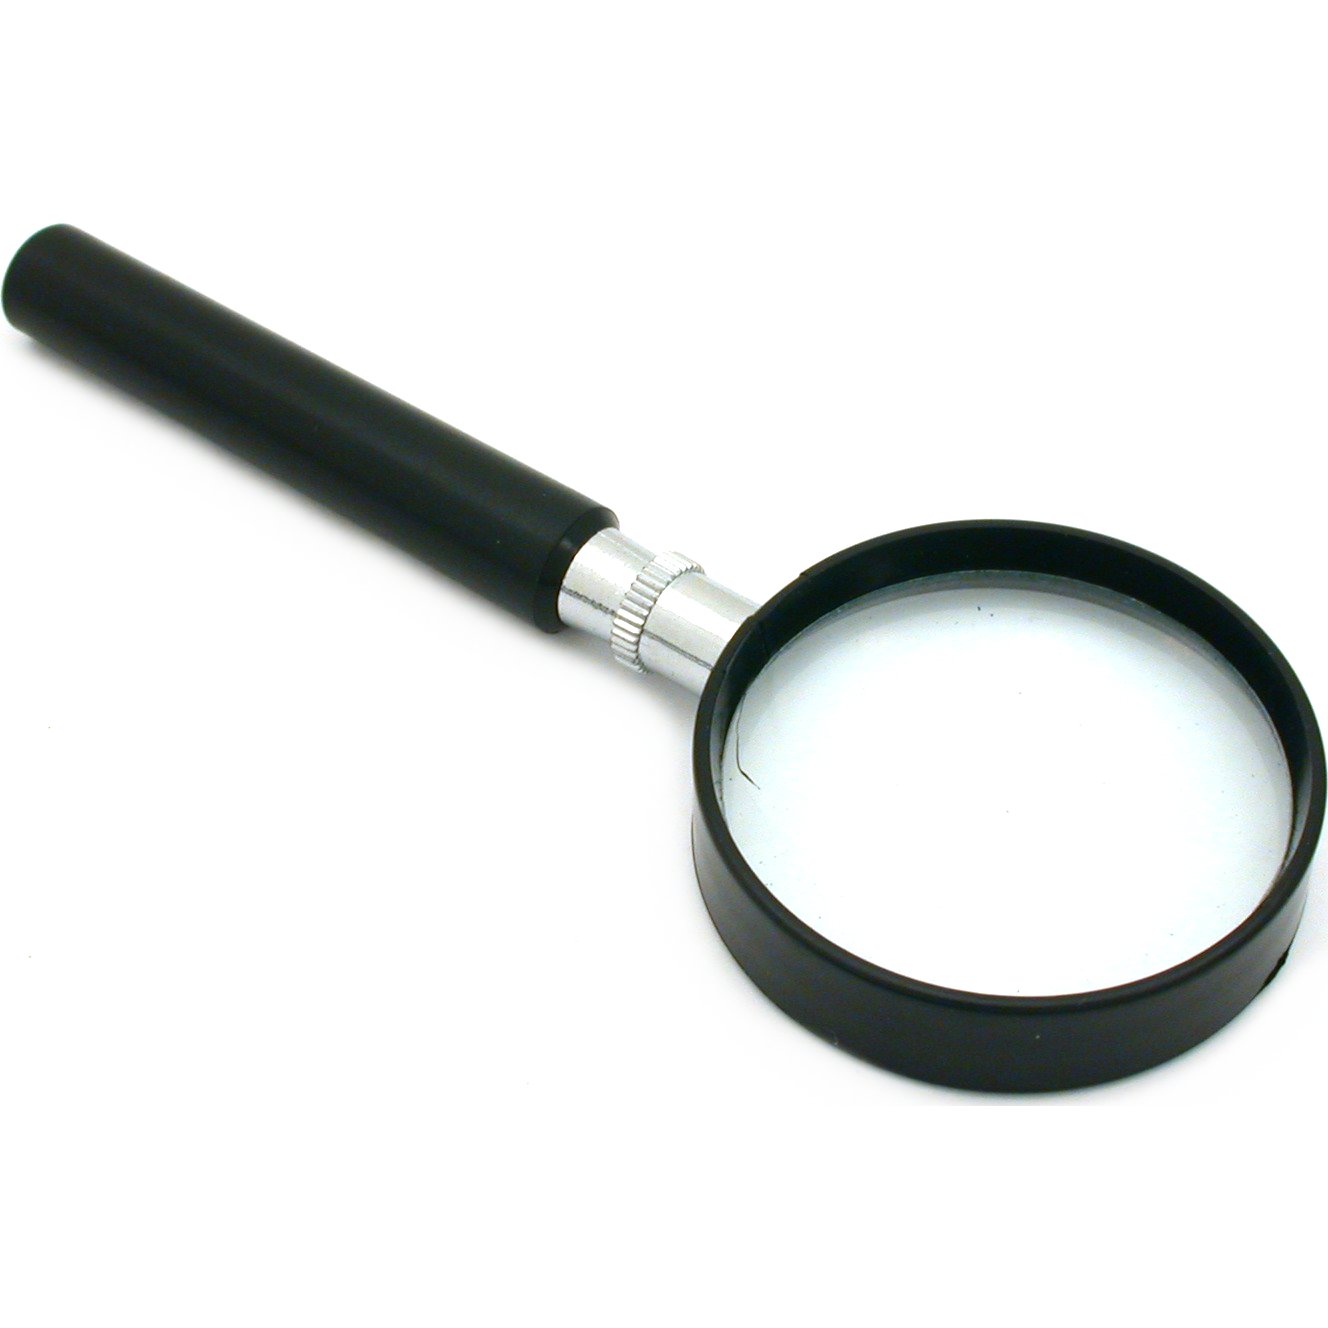 3X Magnifying Glass 2" Reading Maps Stamps Coins Jewelers Gem Inspection Tool